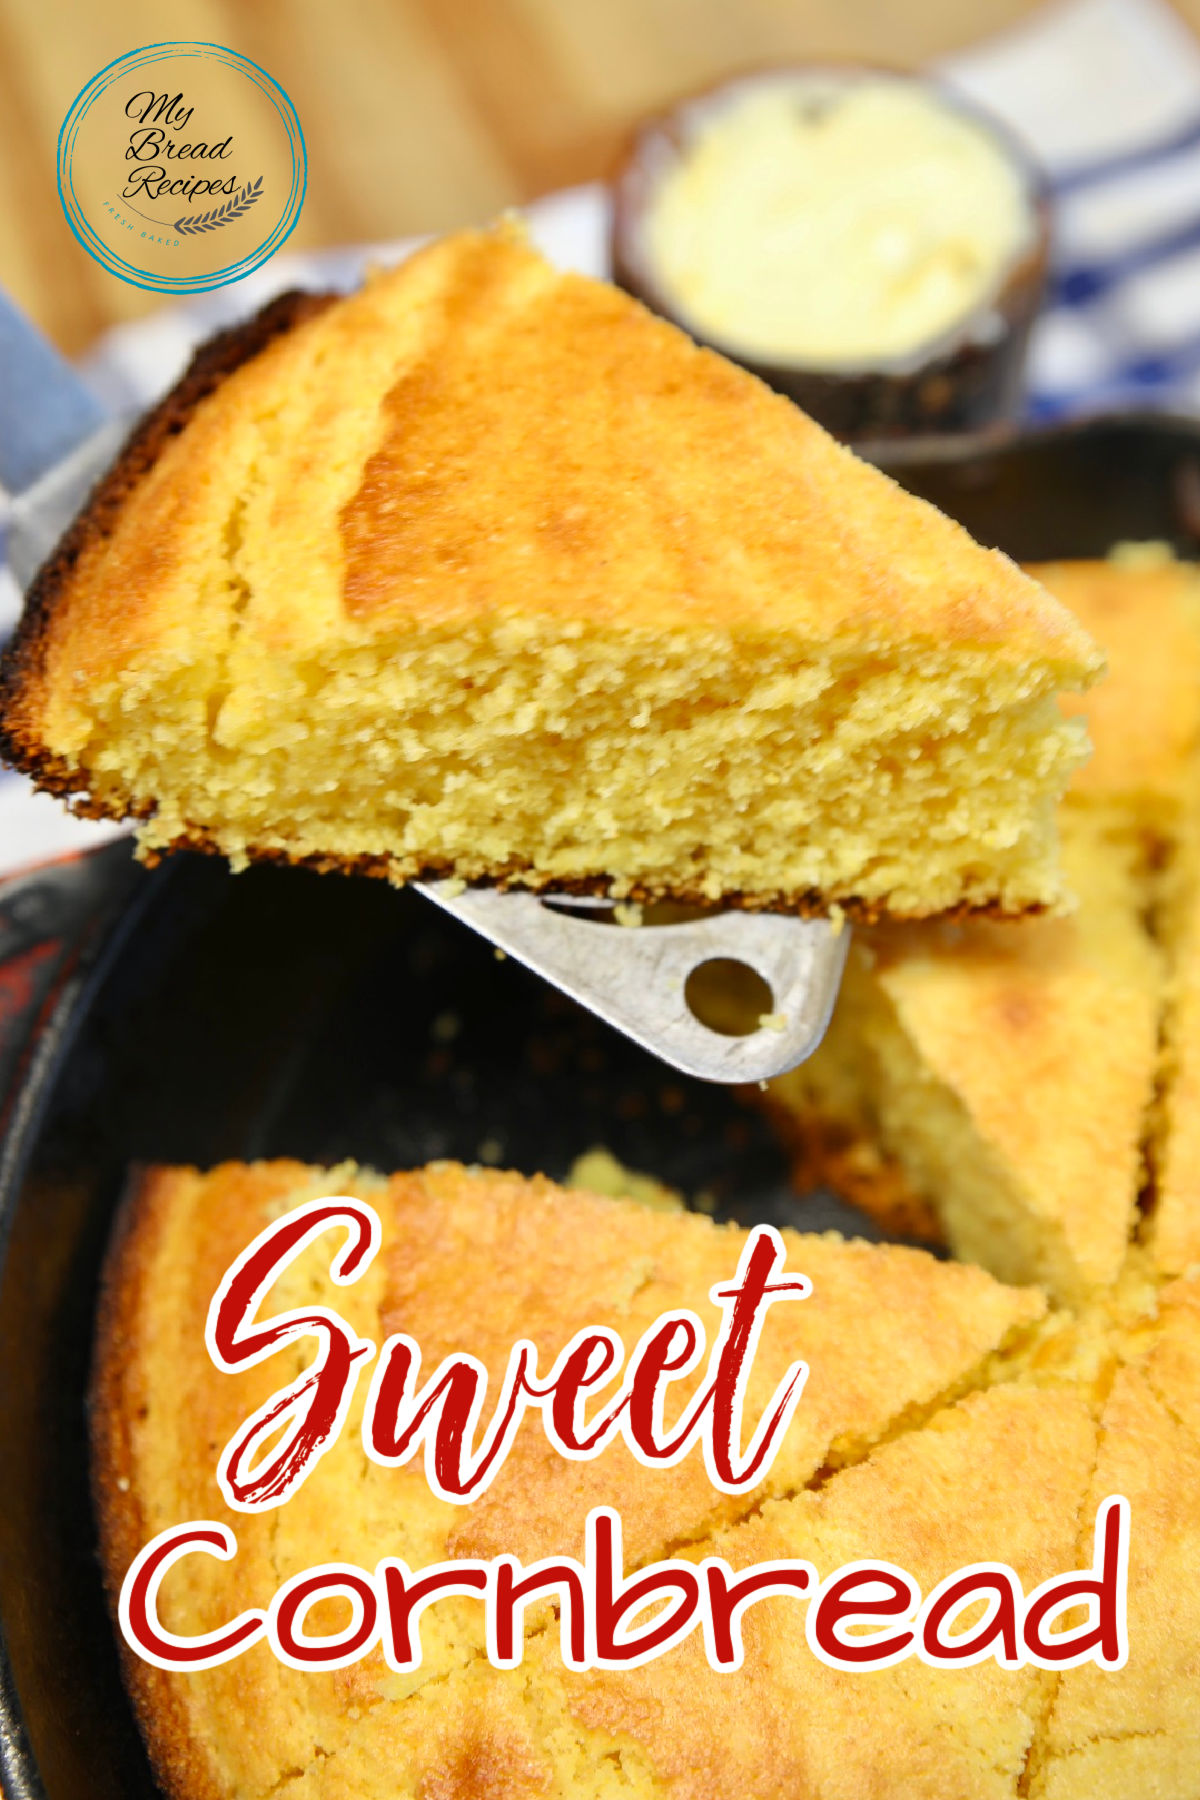 Serving a slice of cornbread - text overlay.